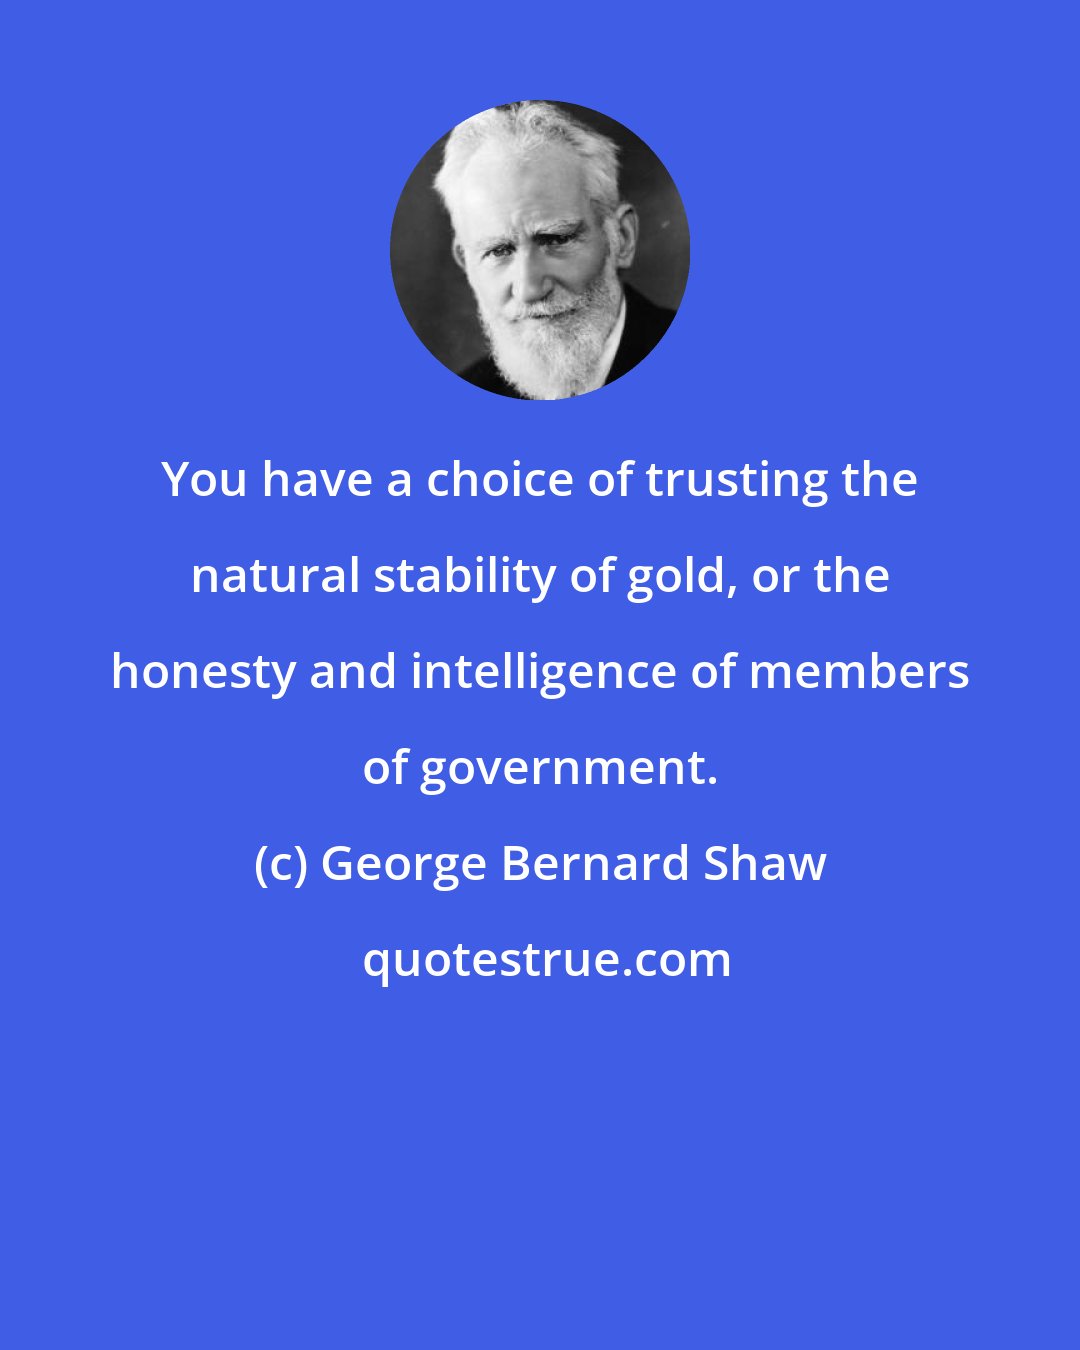 George Bernard Shaw: You have a choice of trusting the natural stability of gold, or the honesty and intelligence of members of government.